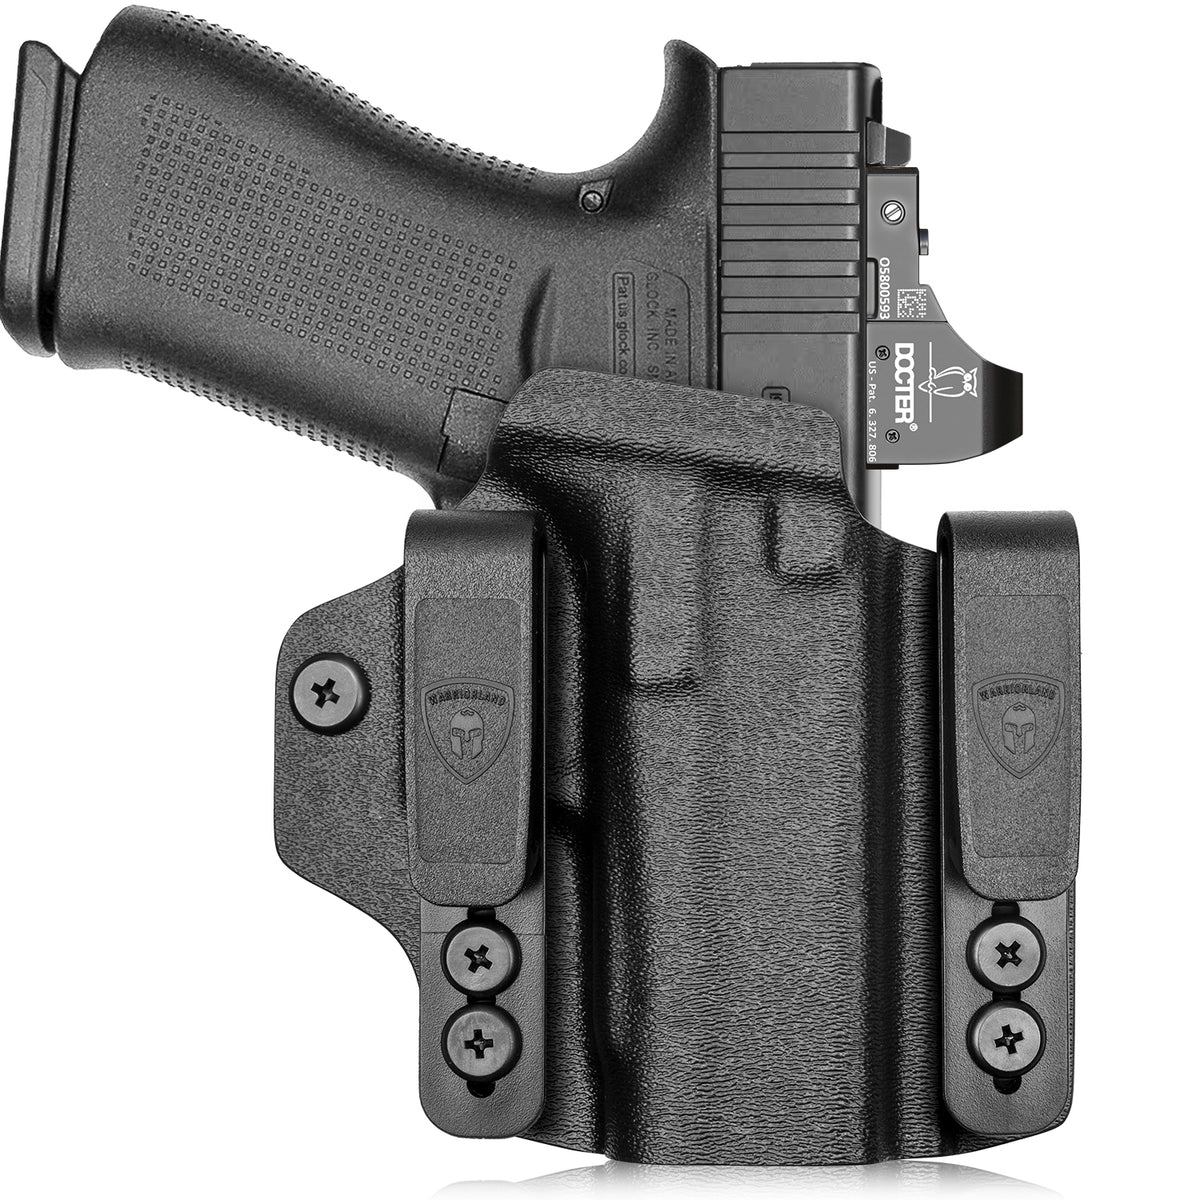 Glock 43/43X/MOS IWB & OWB Convertible Holster Holsters, Optic Ready, Adj Ride Height,Right Hand | Warriorland